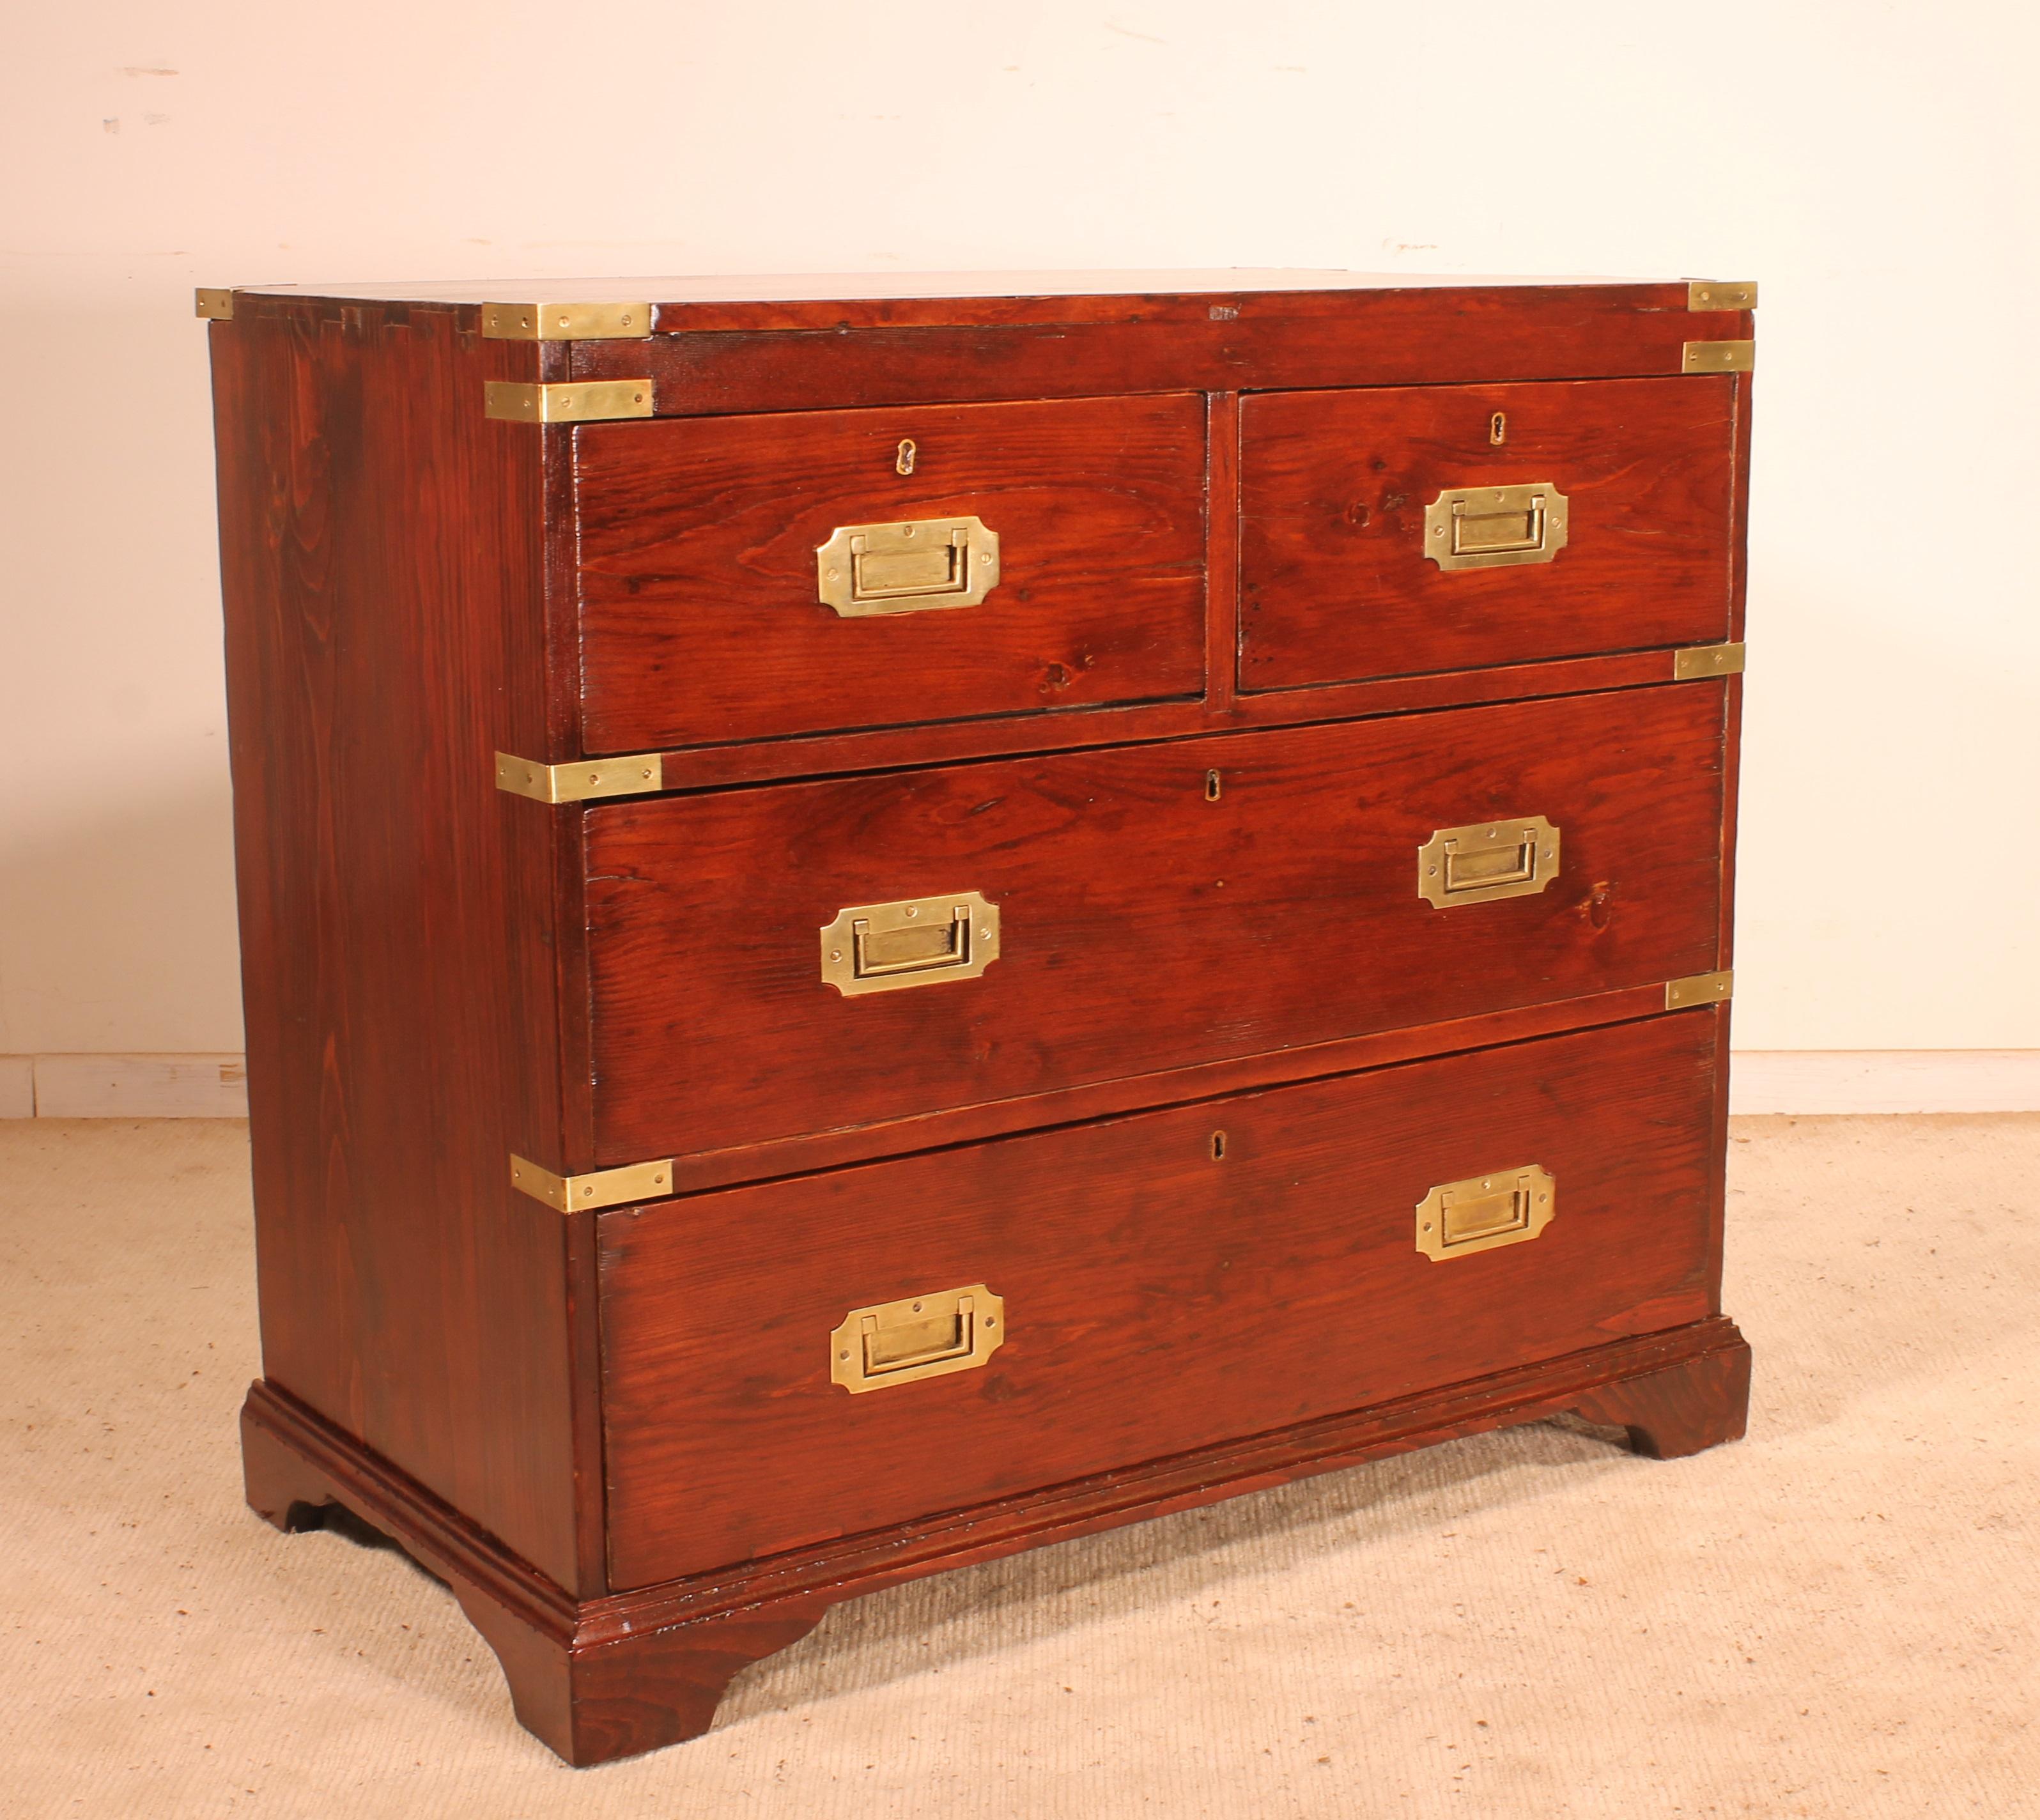 Small Campaign Chest of Drawers from 19th Century Stamped Heals & Sons London 2